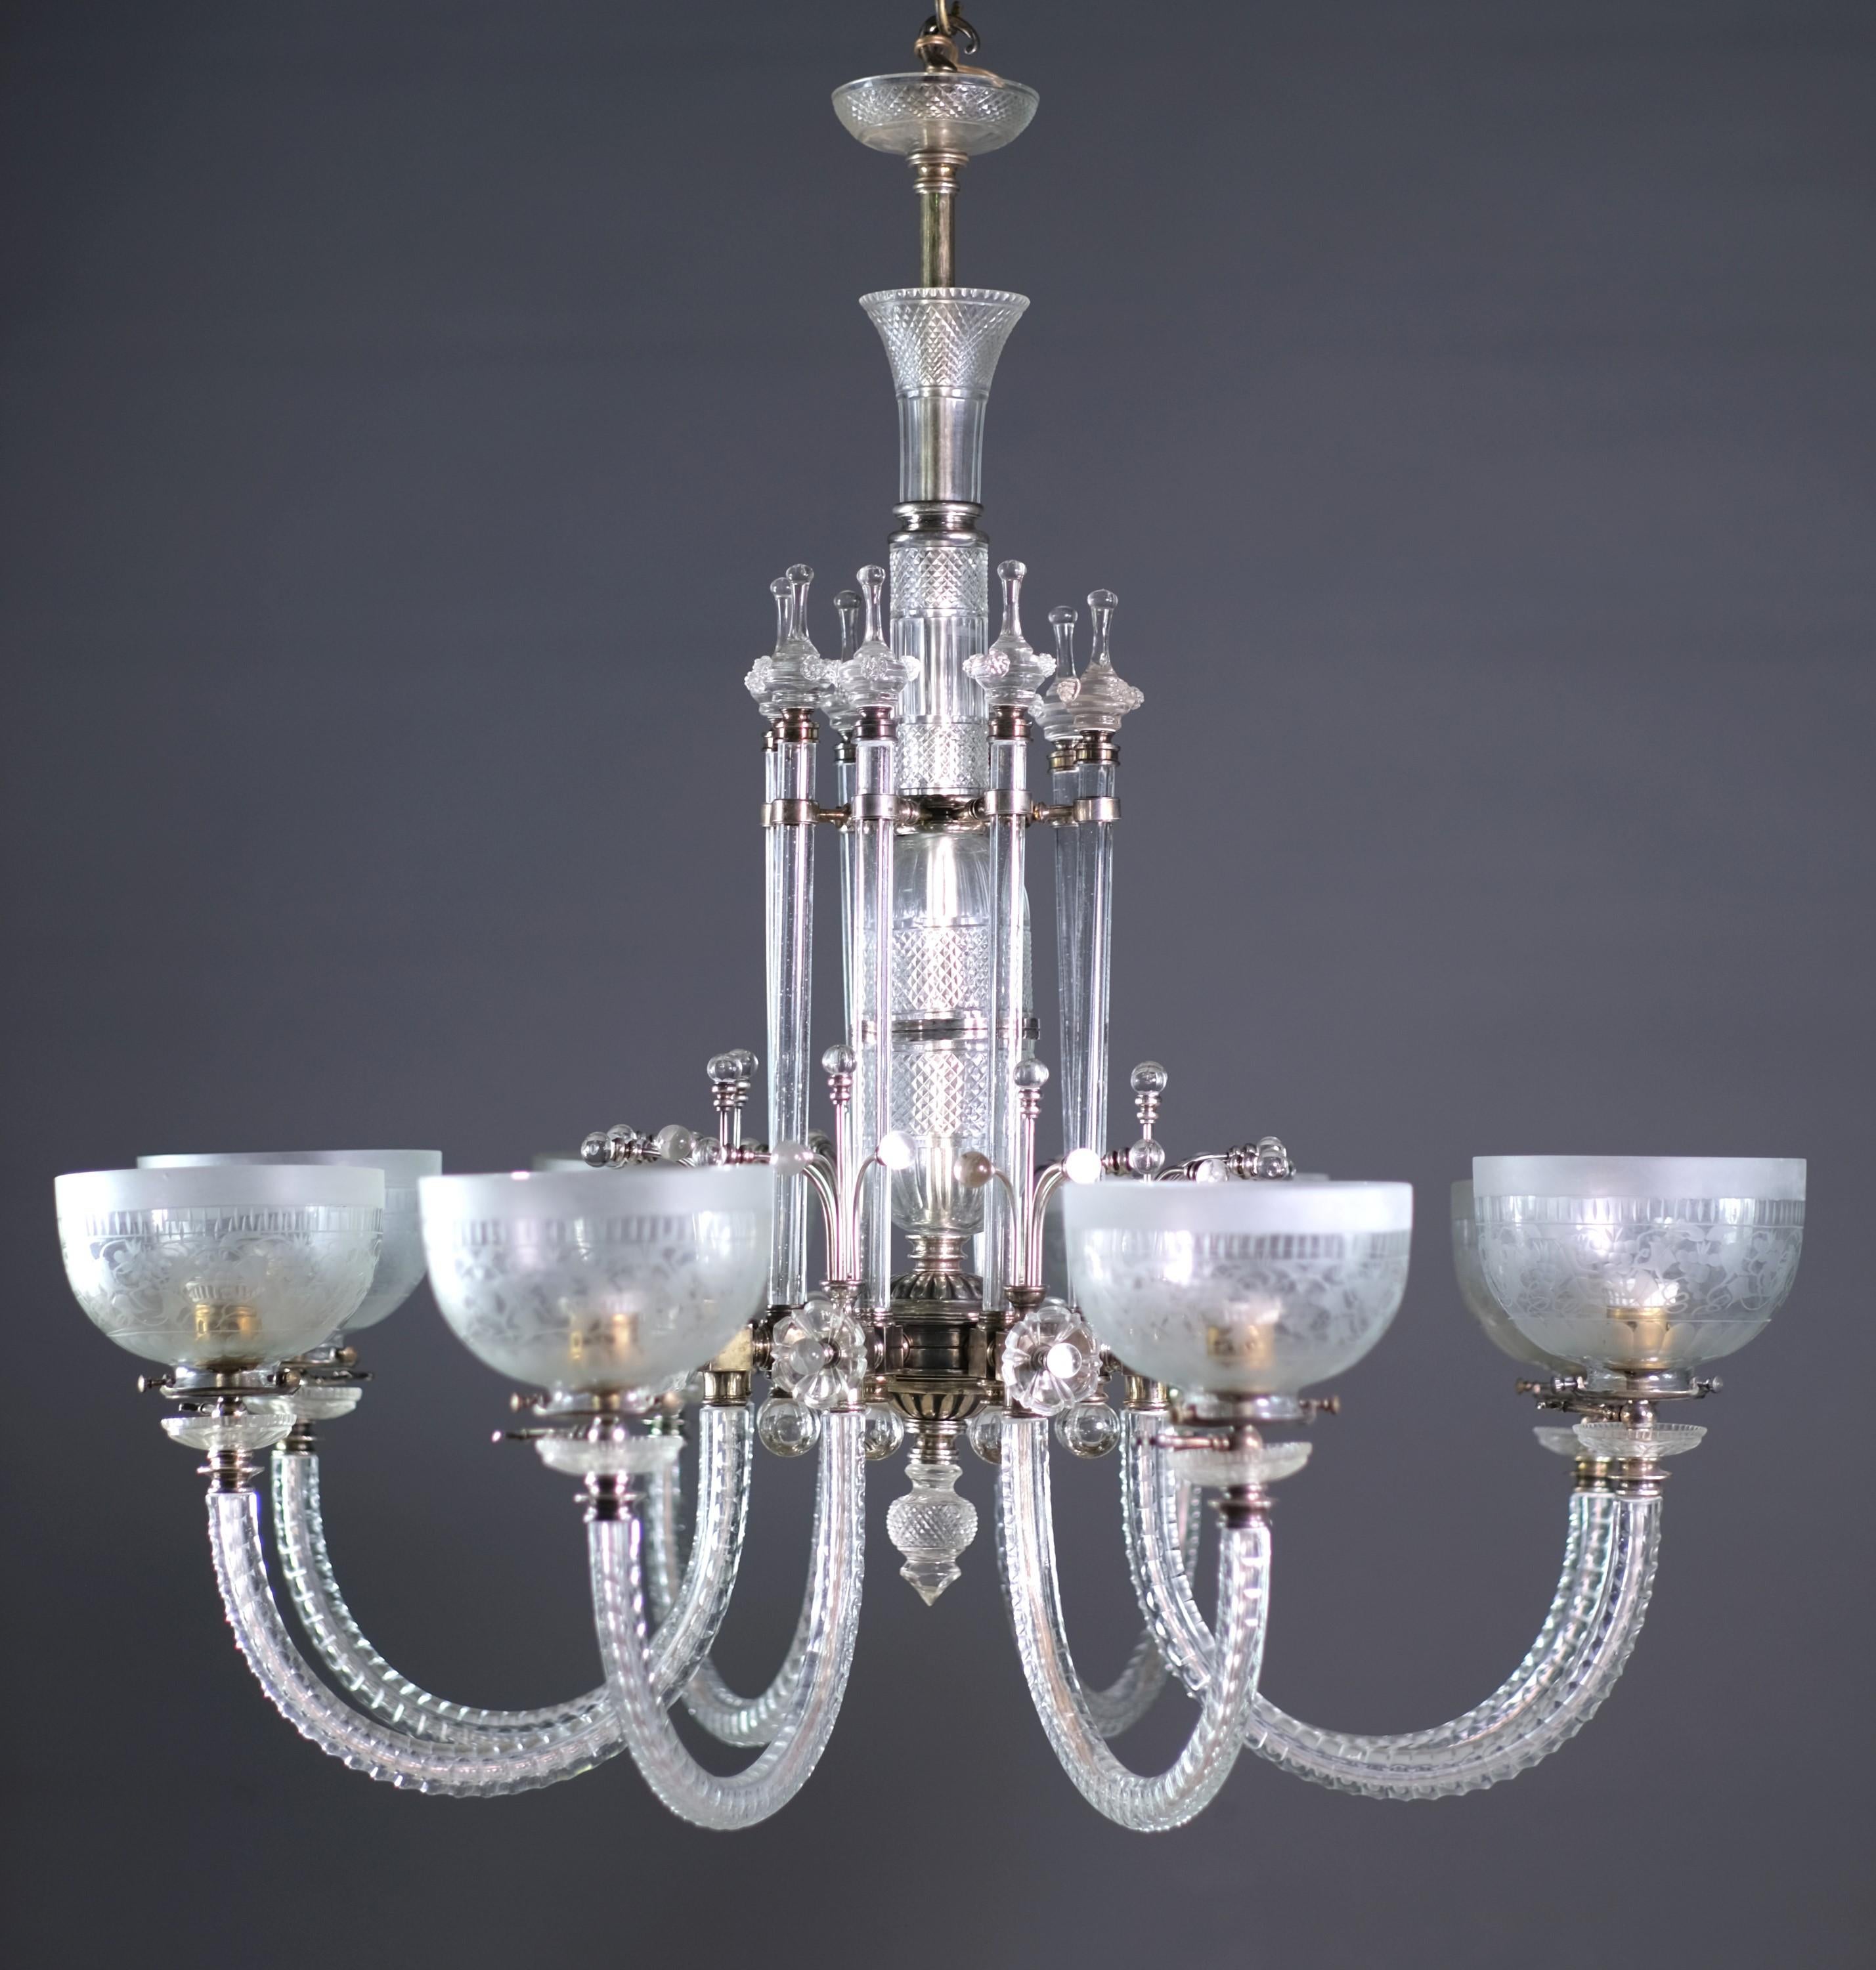 Excellent handcrafted and handmade reproduction of an Osler chandelier. Each piece is highly detailed. Both hand blown and cut crystal techniques. Each shade is etched. Complete with silver plated hardware. Please note, because of the delicacy of